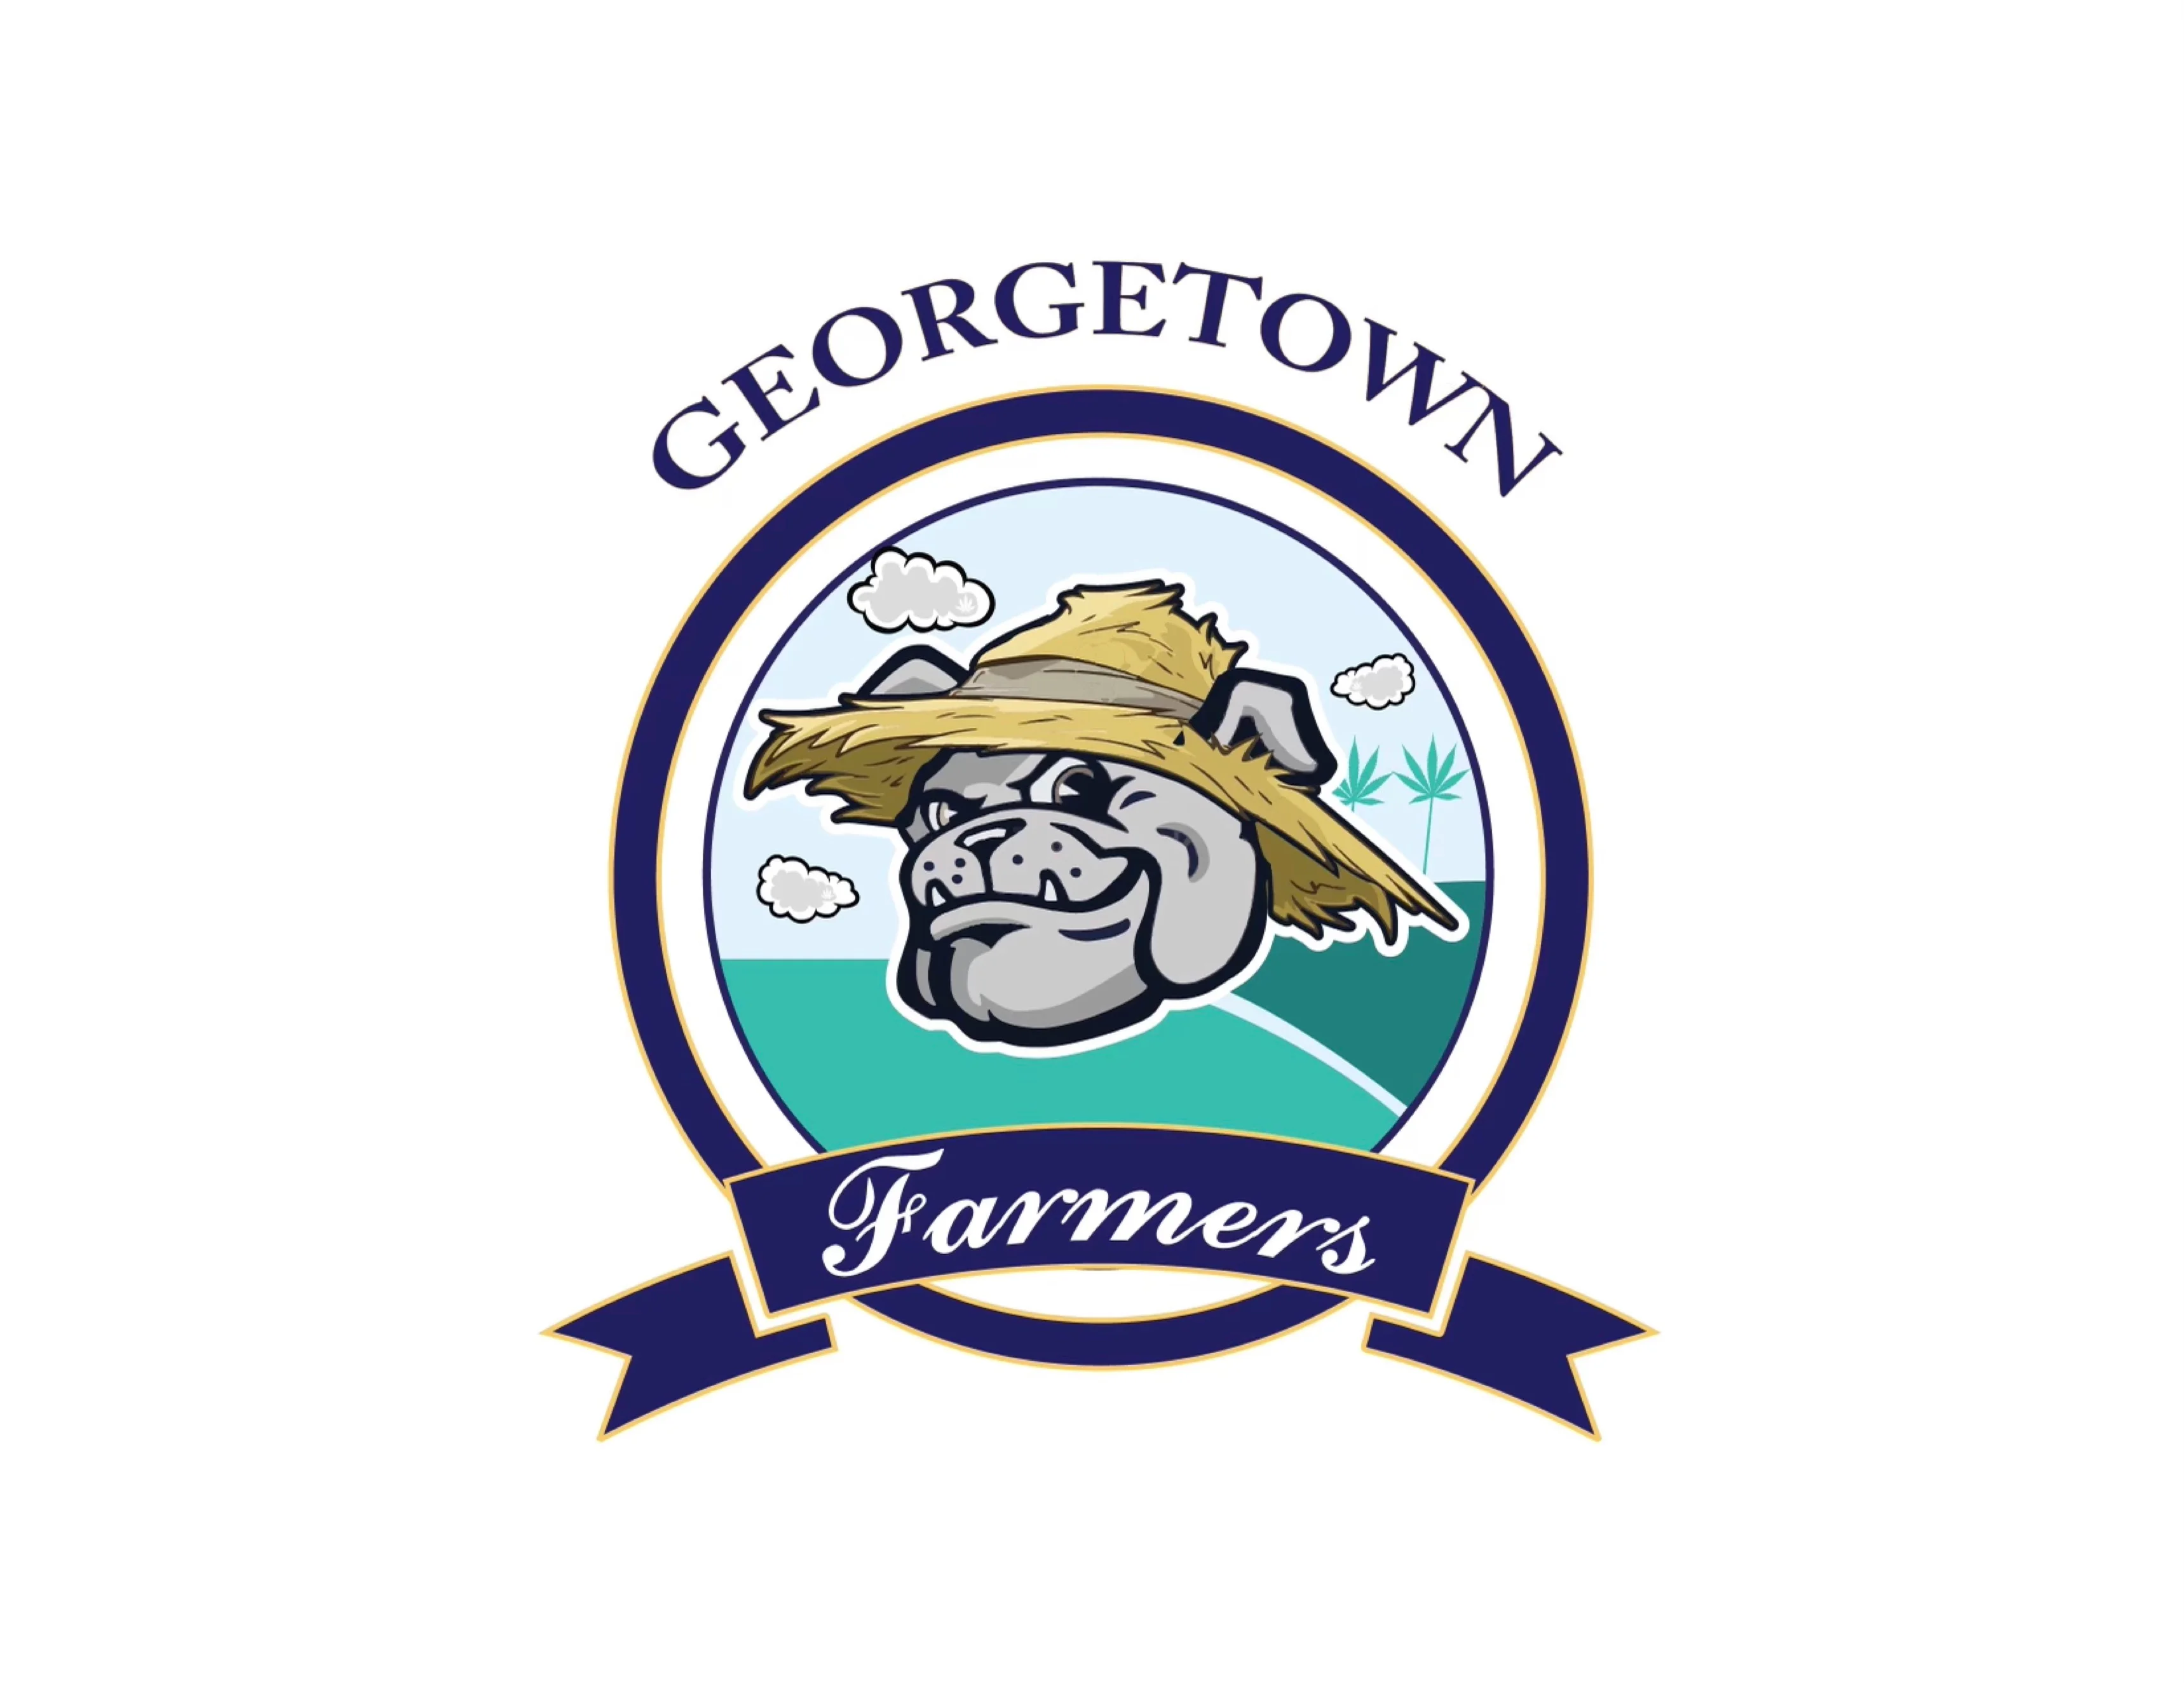 The Georgetown Farmers